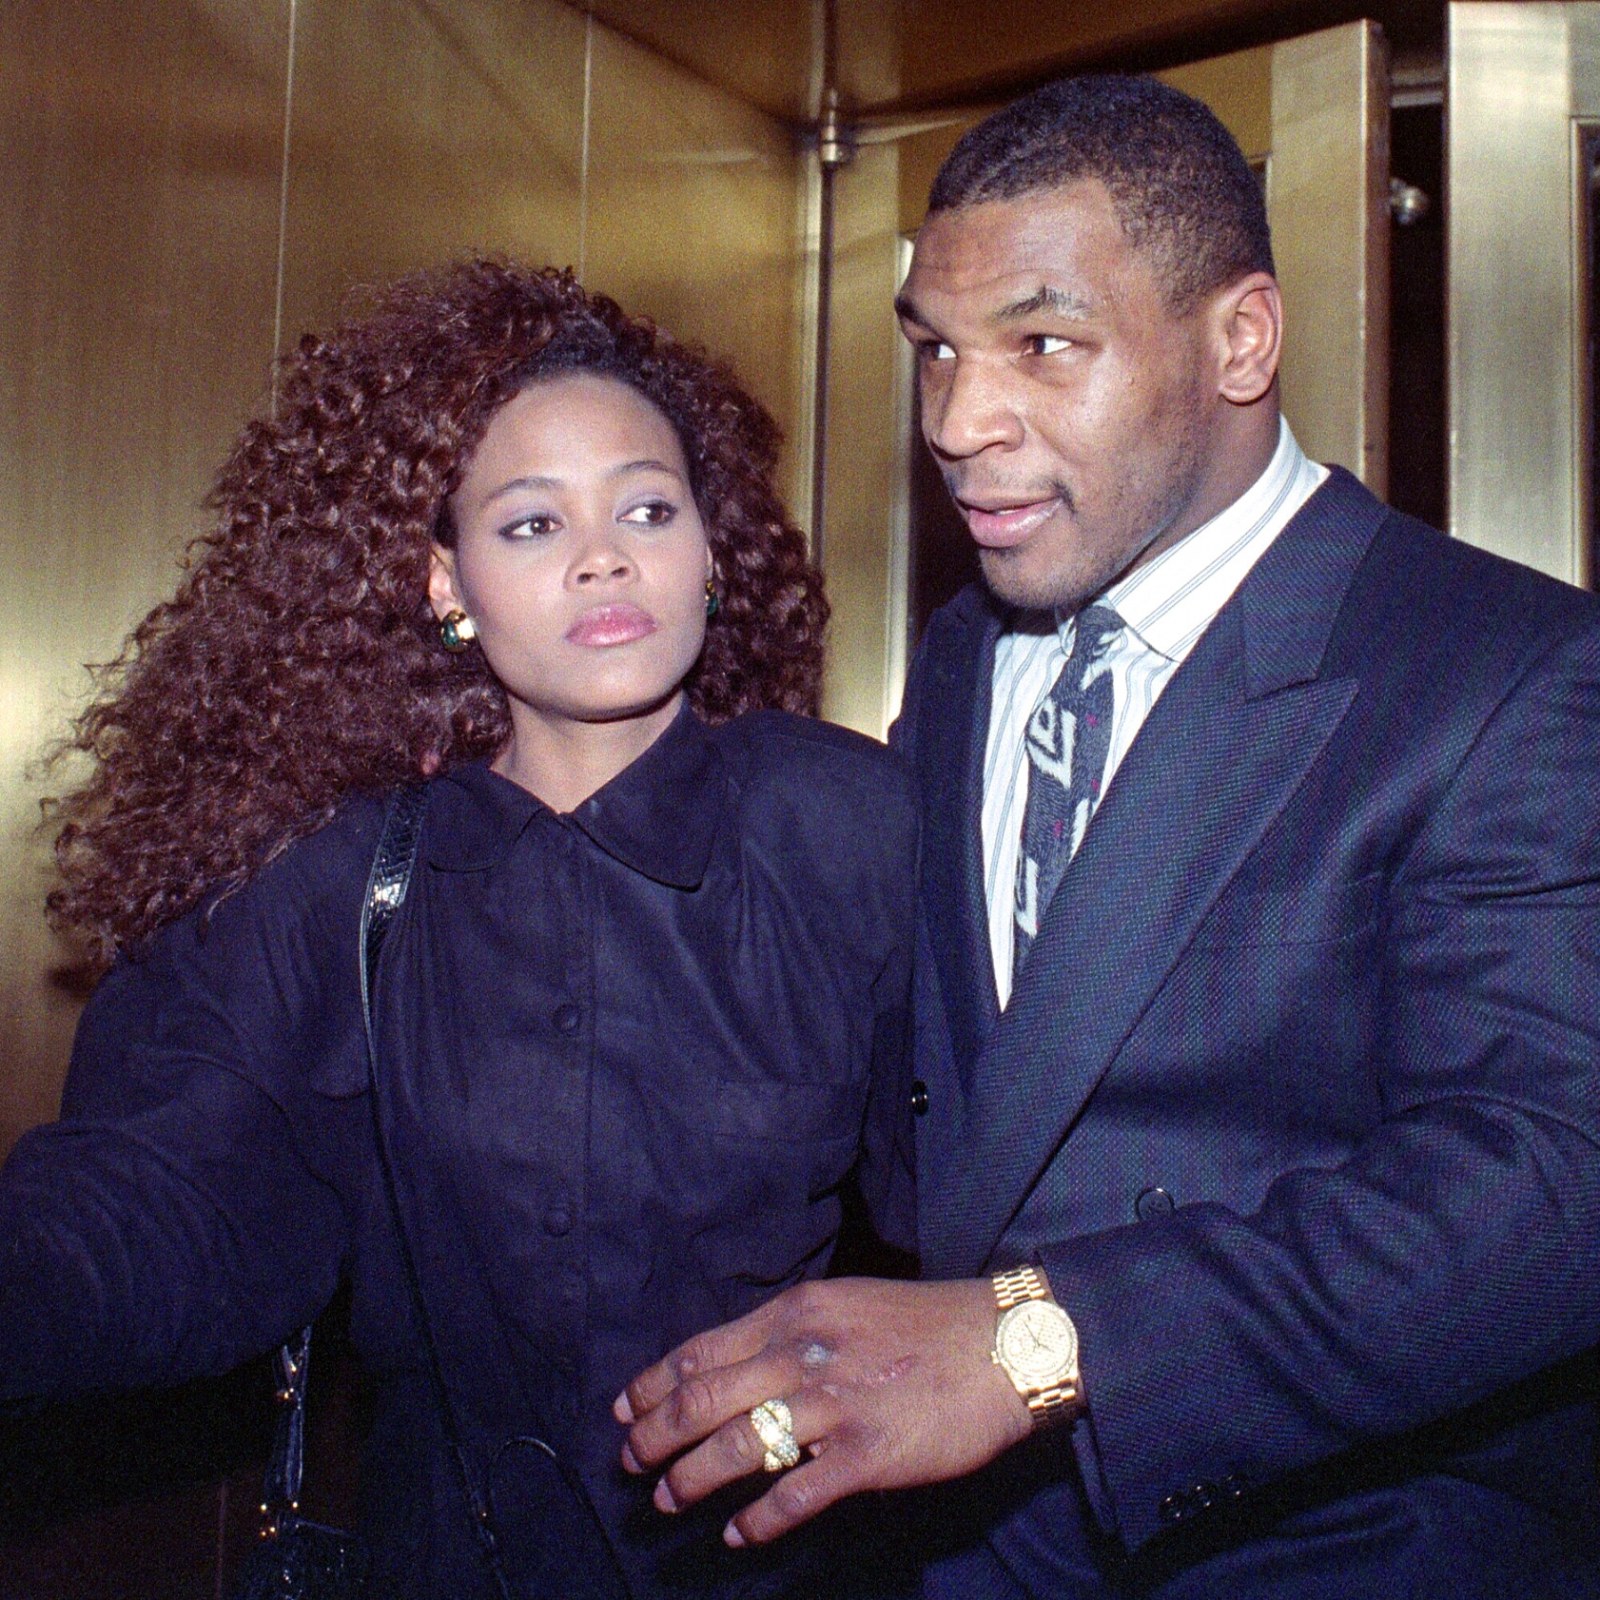 Robin Givens Divorce Settlement: Here's The Truth Behind Robin And Mike Tyson's Split